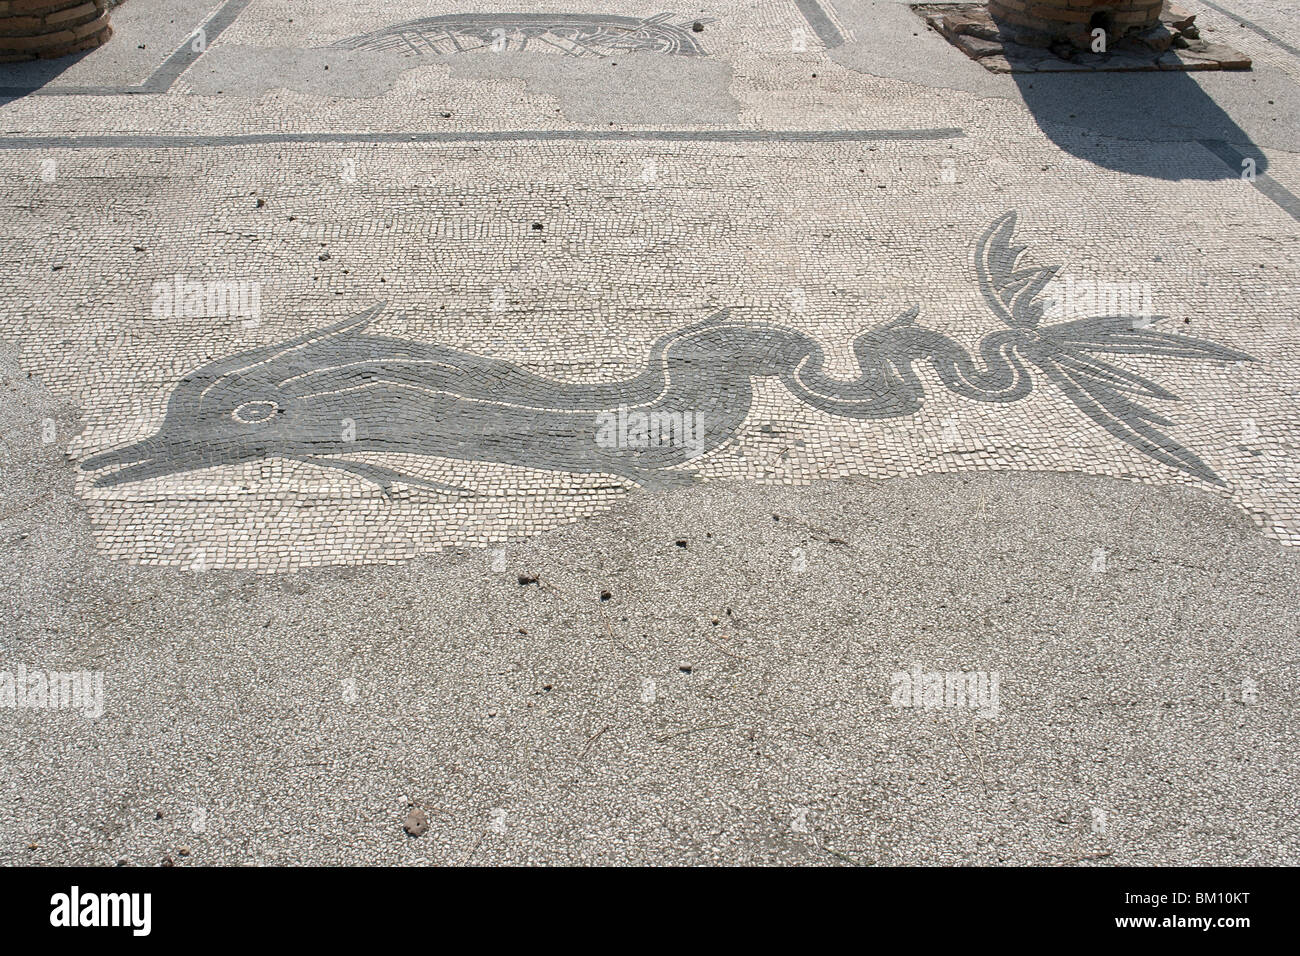 Ostia Antica. Mosaic in the Piazzale delle Corporazioni showing a dolphin with an elaborated tail Stock Photo